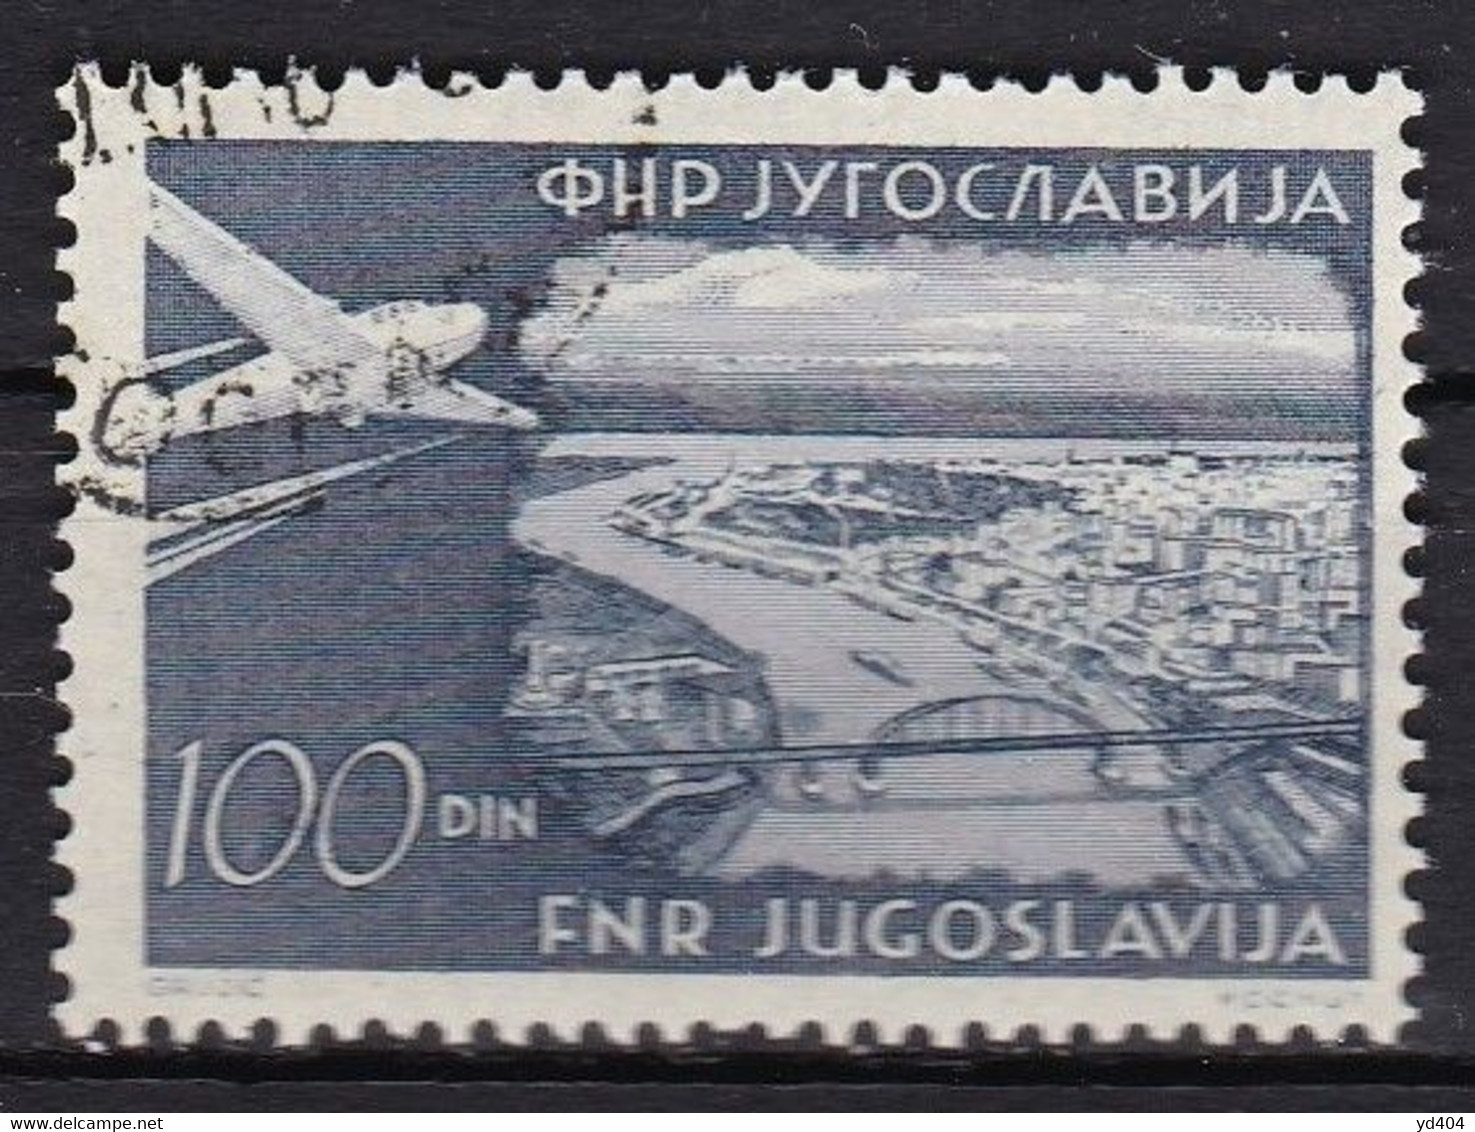 YU409 – YOUGOSLAVIA – AIRMAIL – 1951 – PLANE OVER BELGRADE – Y&T # 40 USED 22 € - Luchtpost